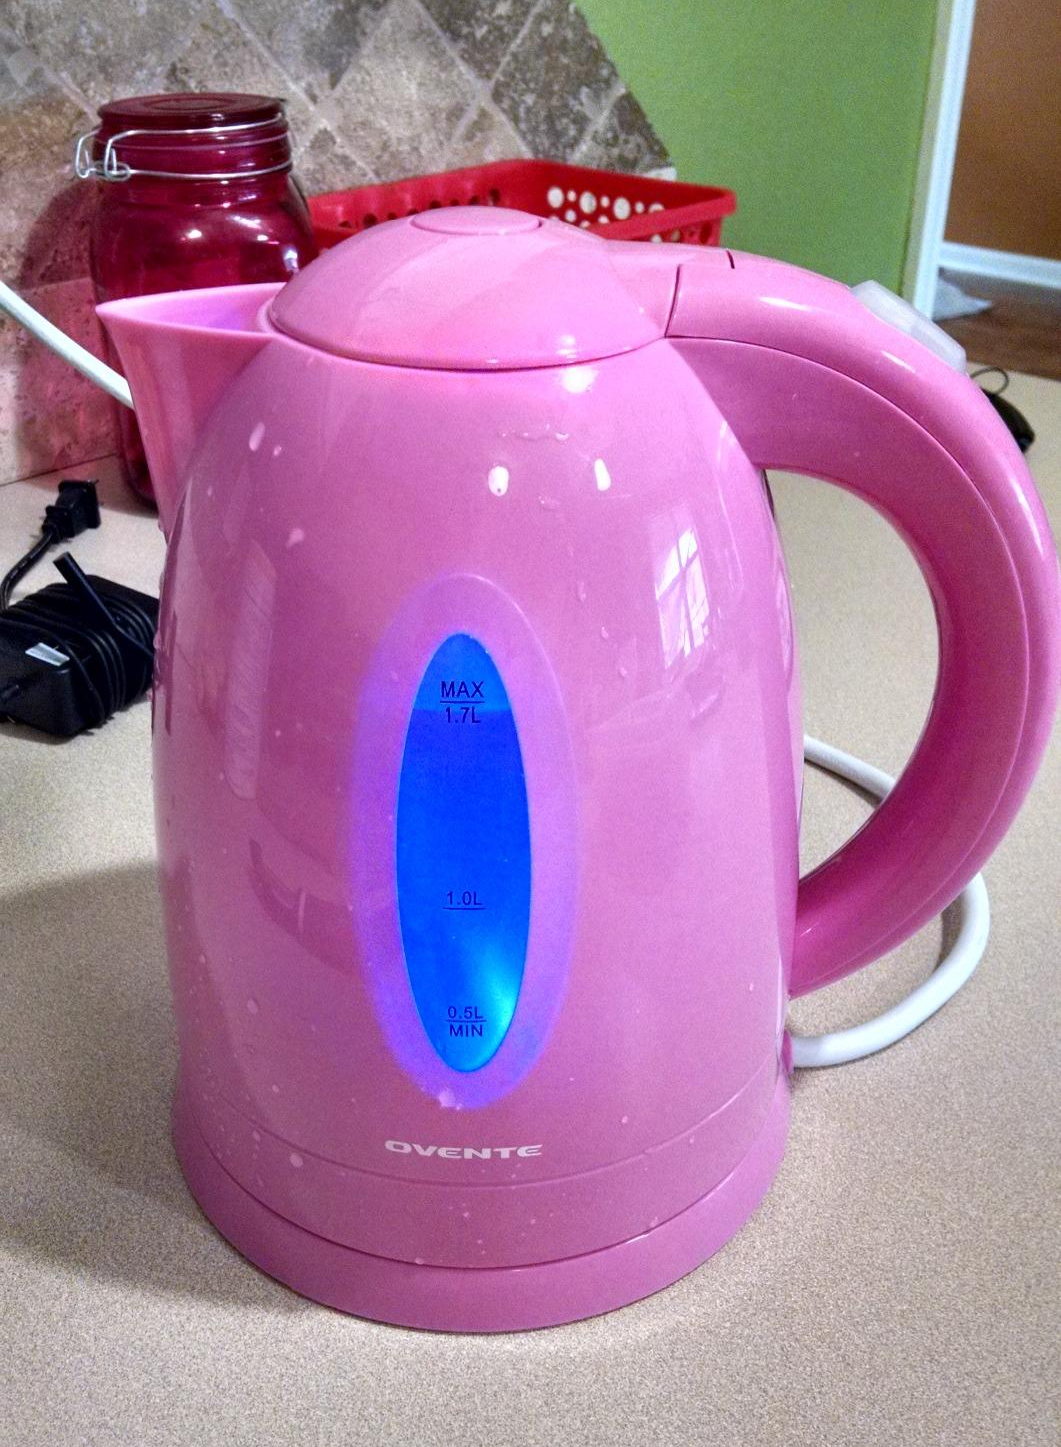 reviewer photo of their full, bright pink electric kettle in the process of boiling water